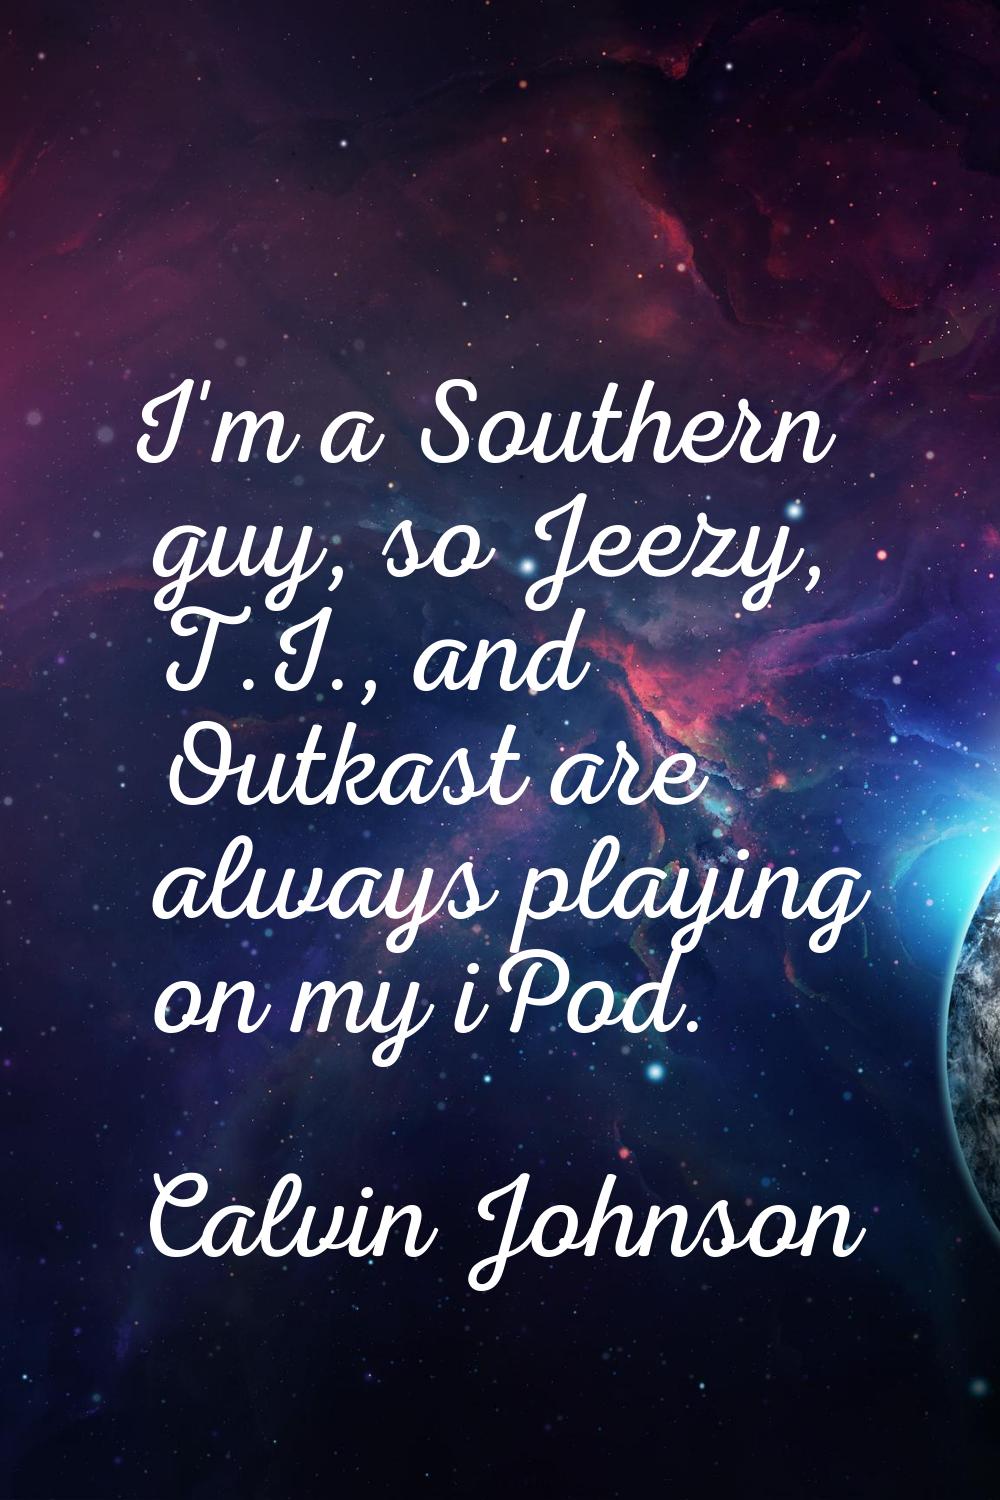 I'm a Southern guy, so Jeezy, T.I., and Outkast are always playing on my iPod.